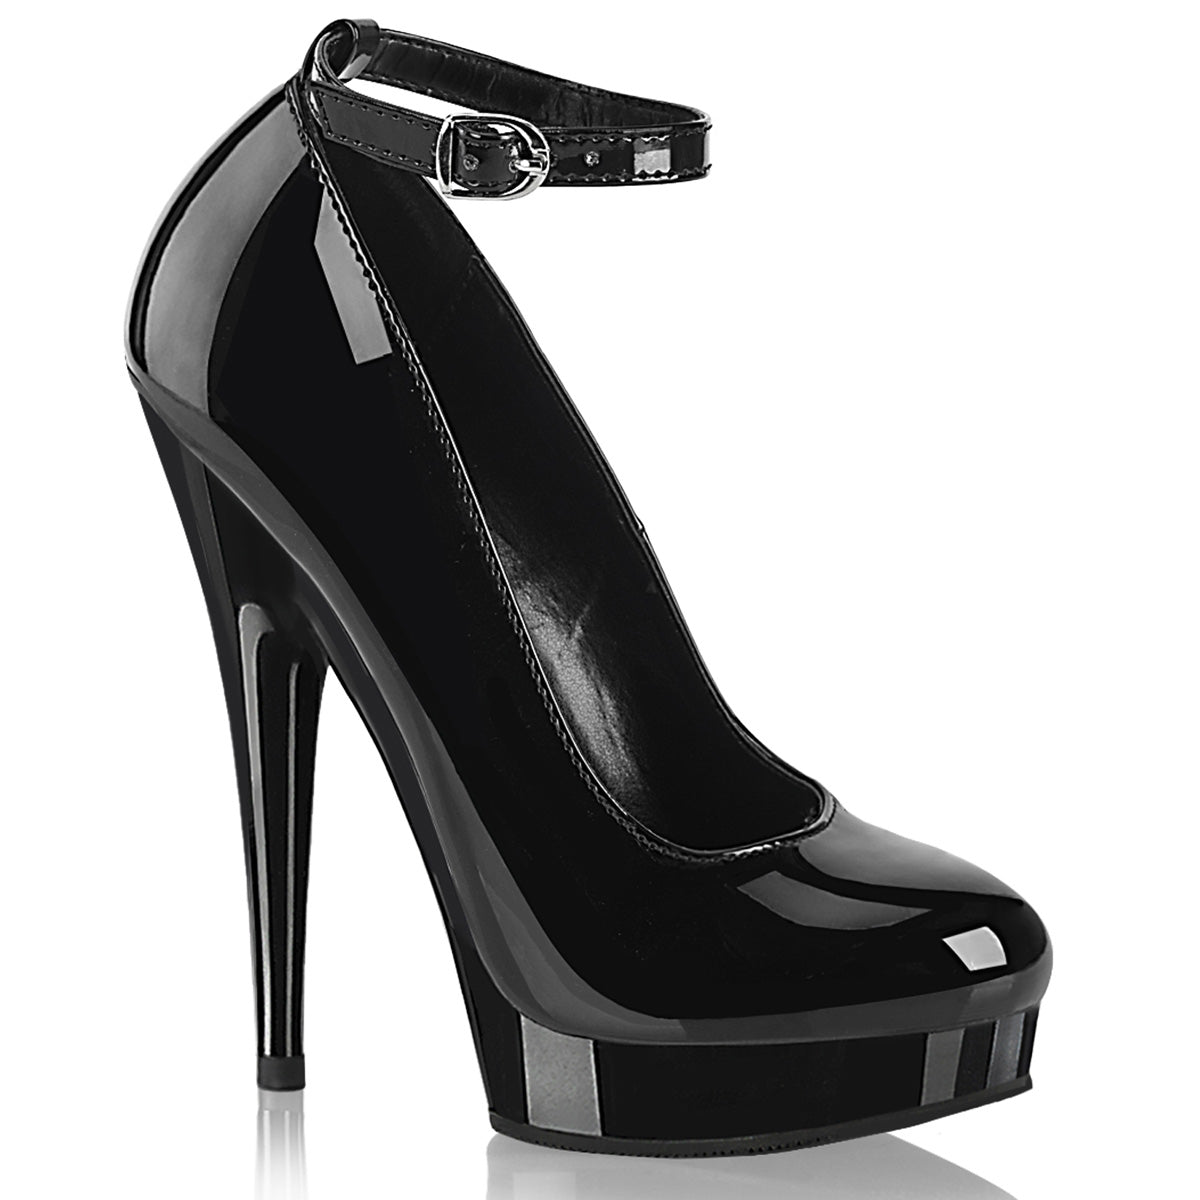 SULTRY-686 Ankle Pumps High Heel